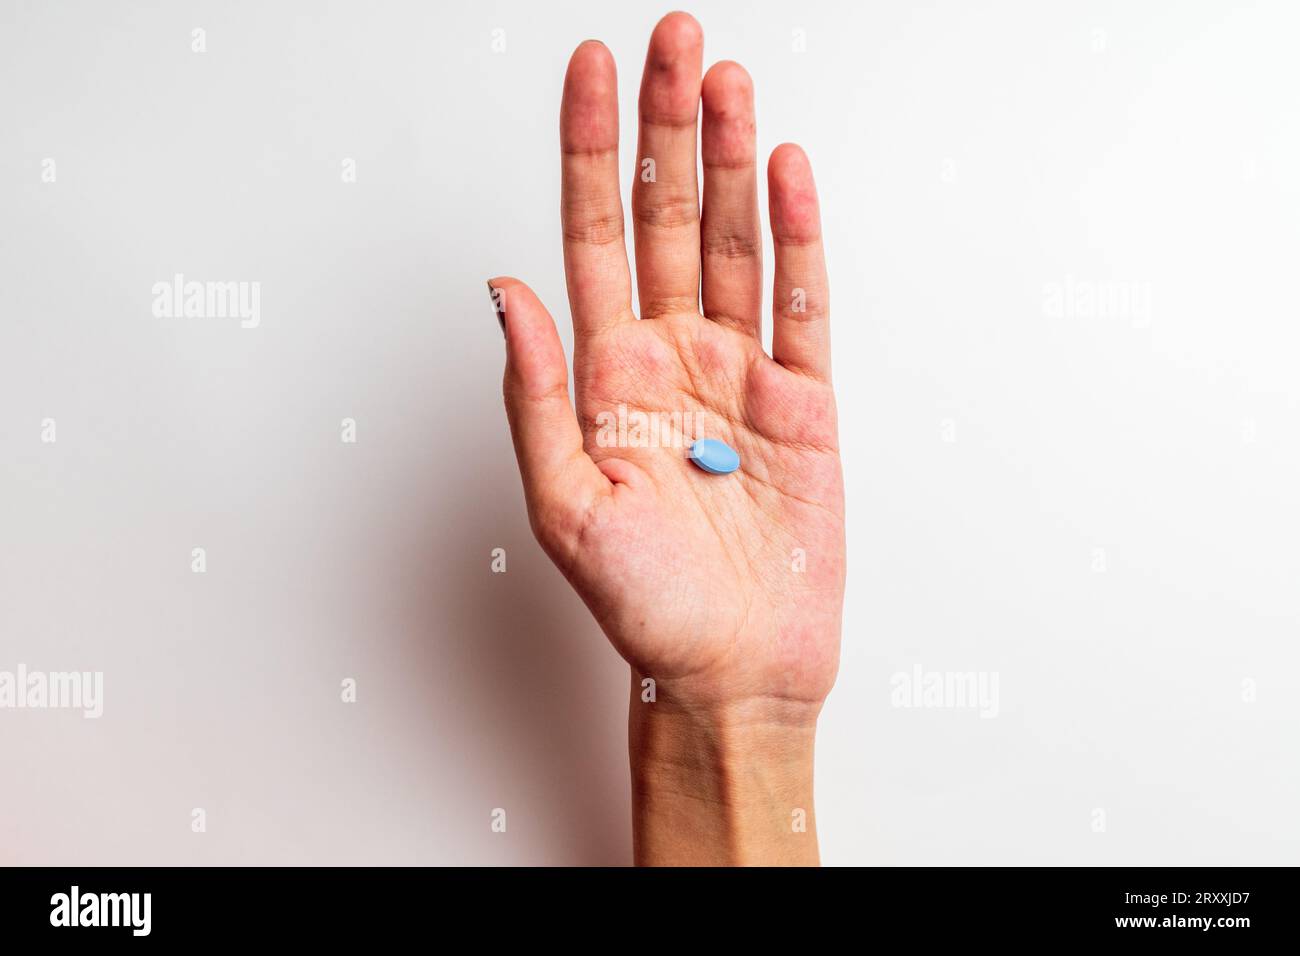 A Woman's hand holding a pill, isolated on the white background Stock Photo